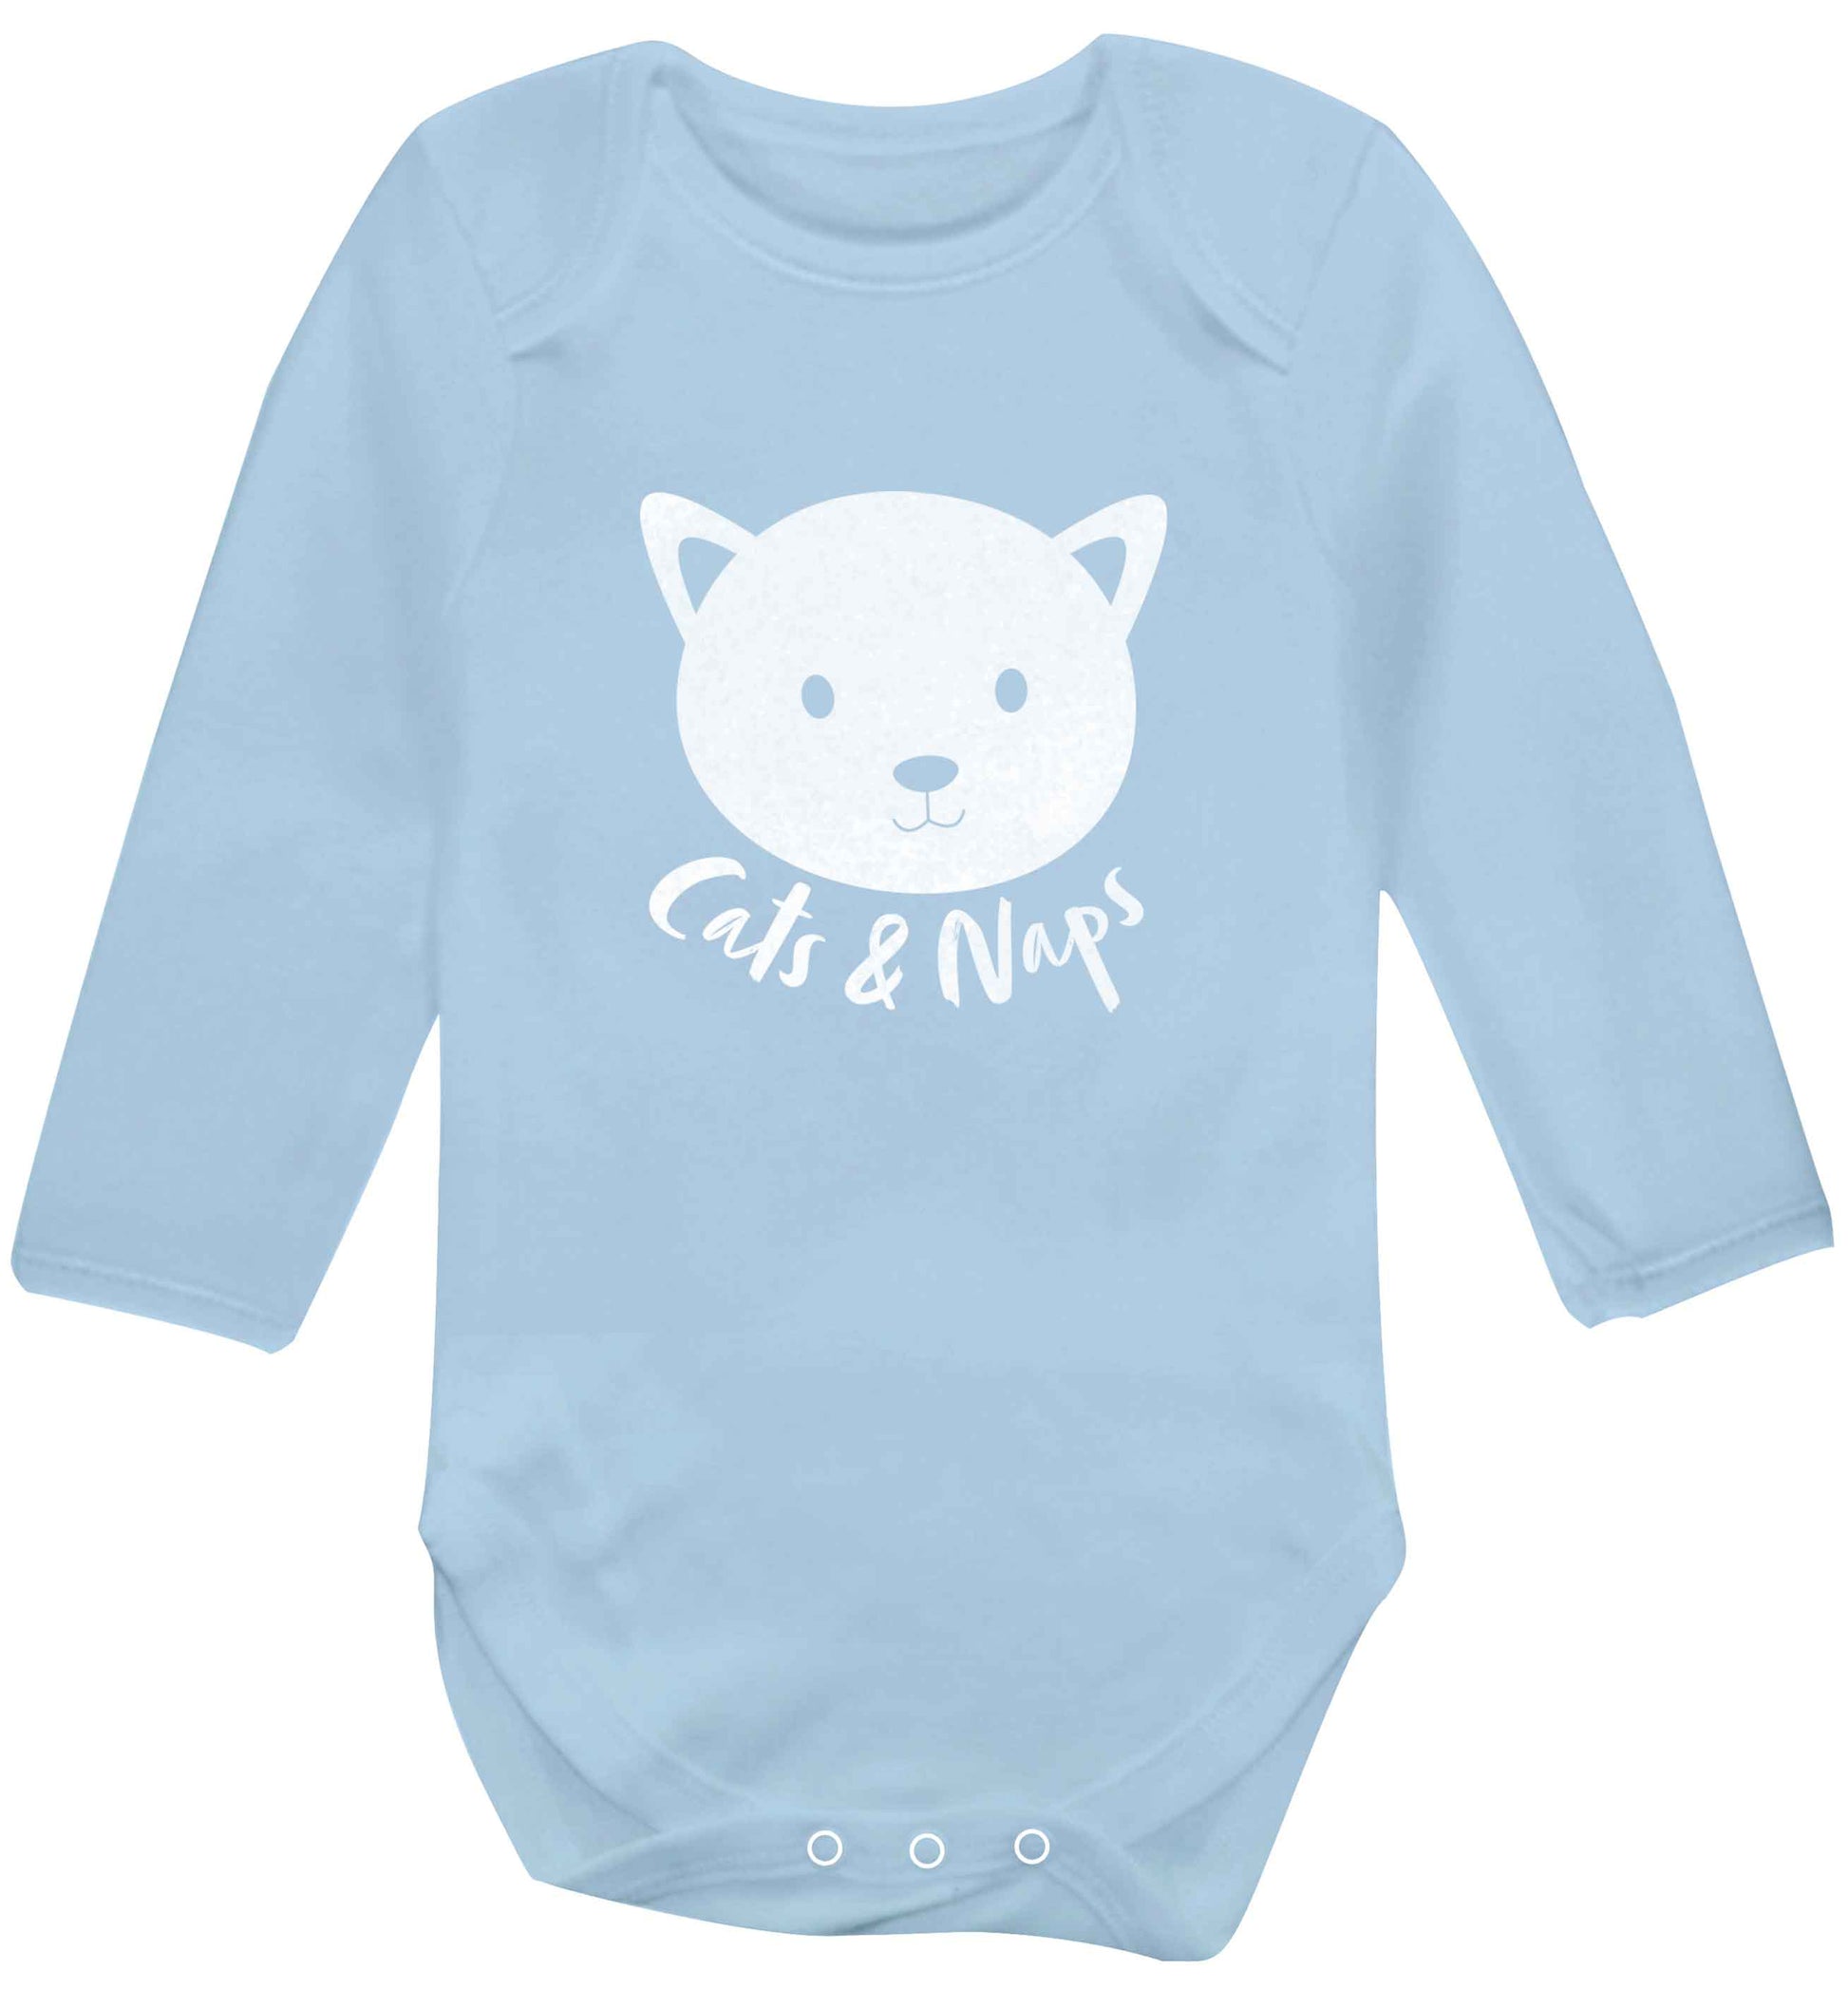 Cats and naps Kit baby vest long sleeved pale blue 6-12 months